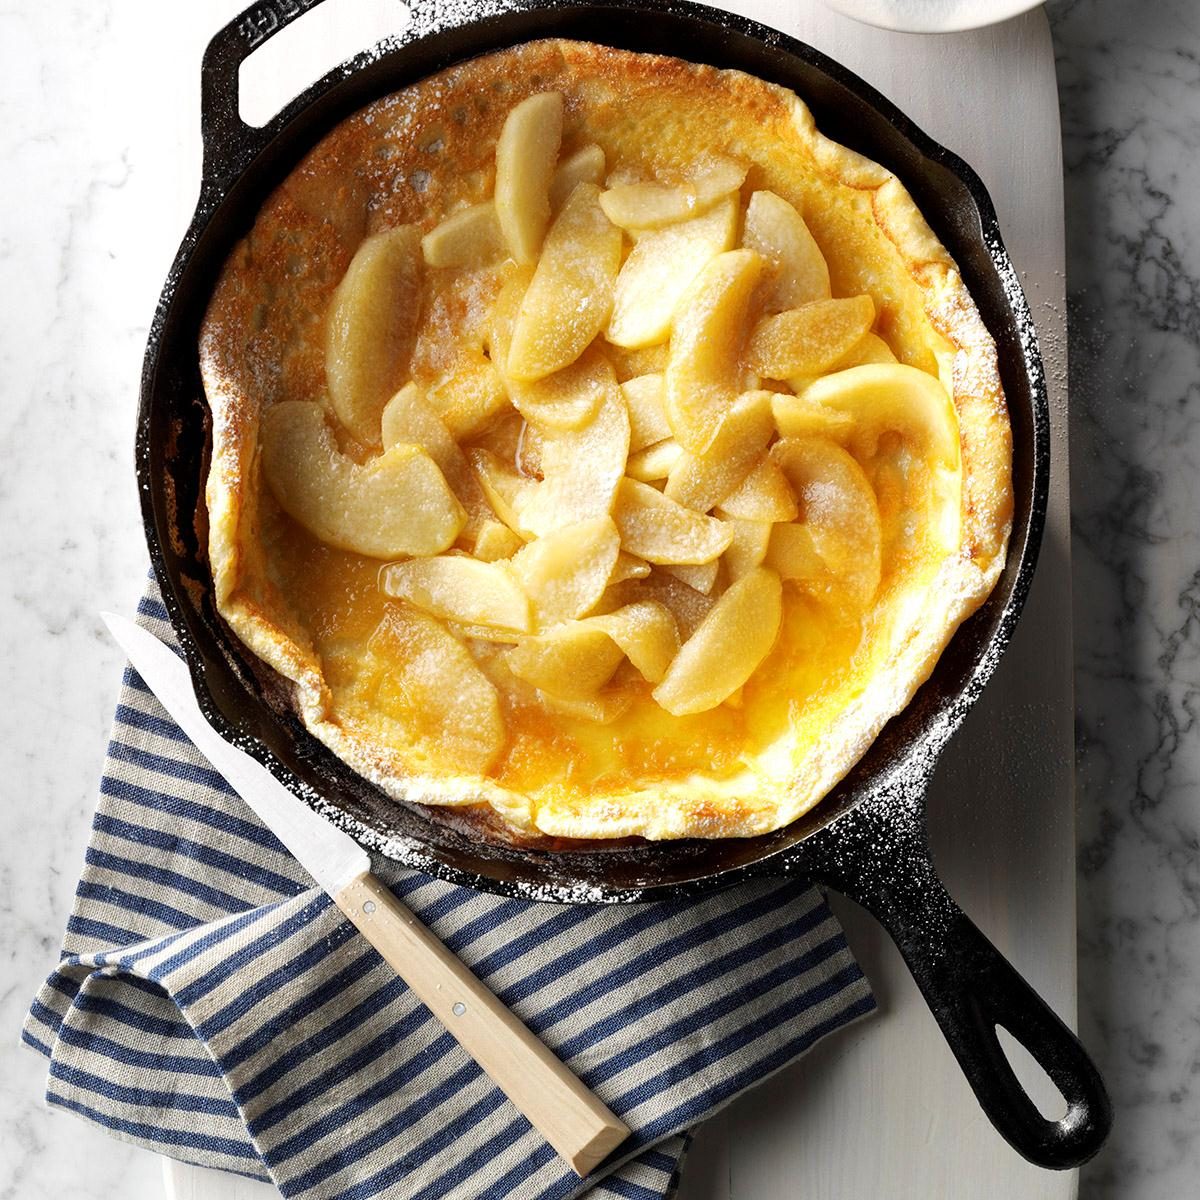 Cast-Iron Skillet Casseroles - Taste of the South